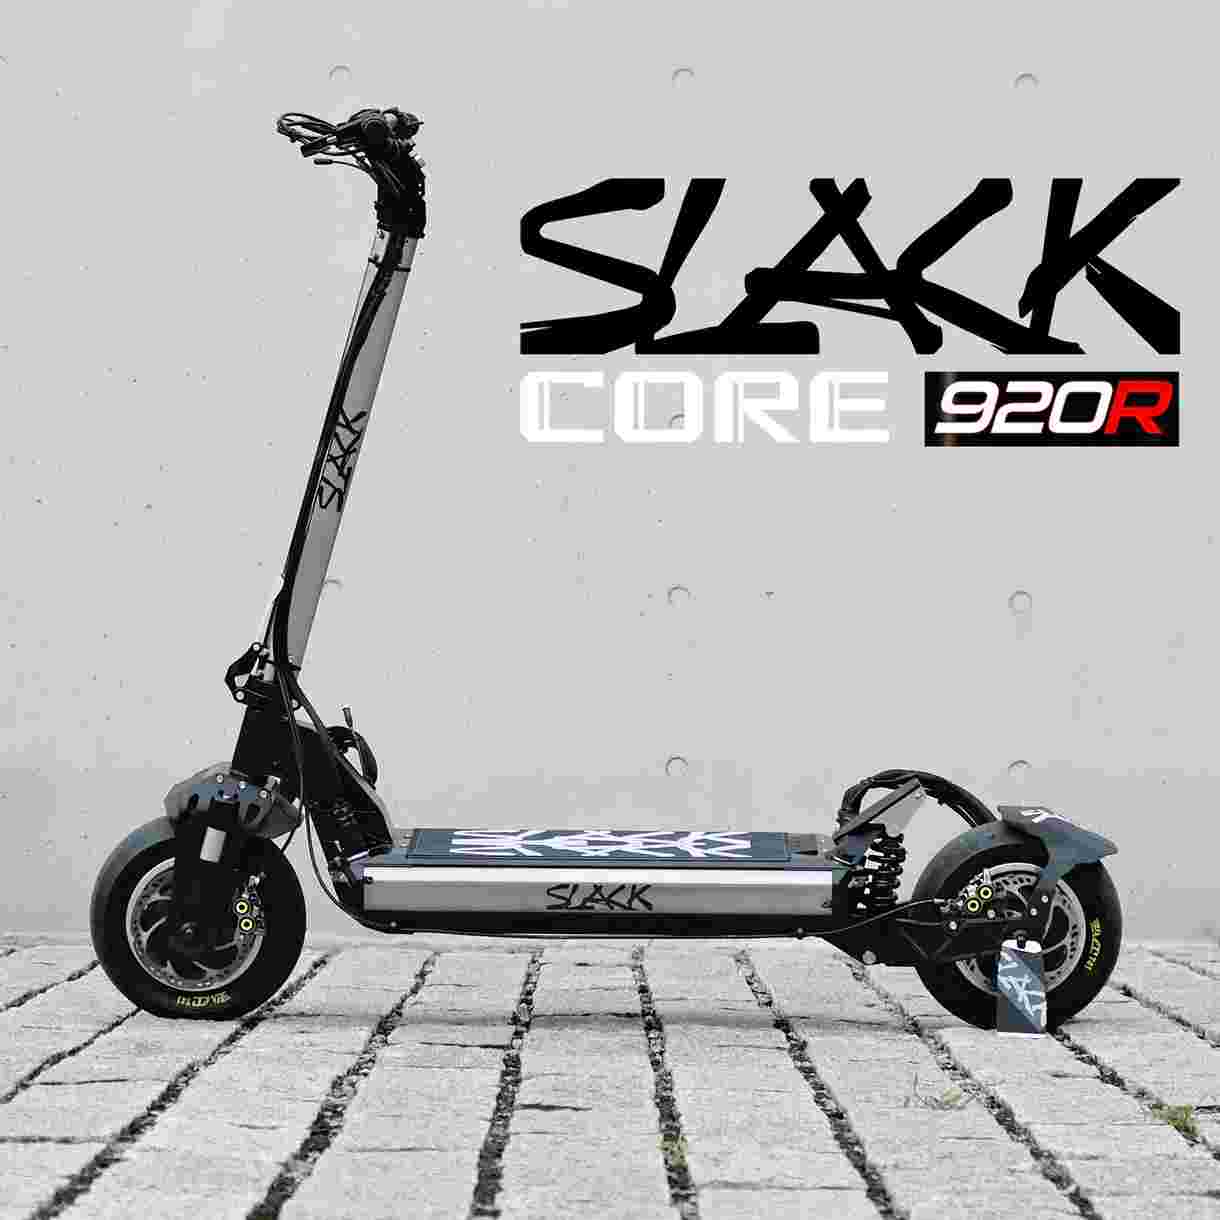 Slack Core 920R is the fastest electric scooter